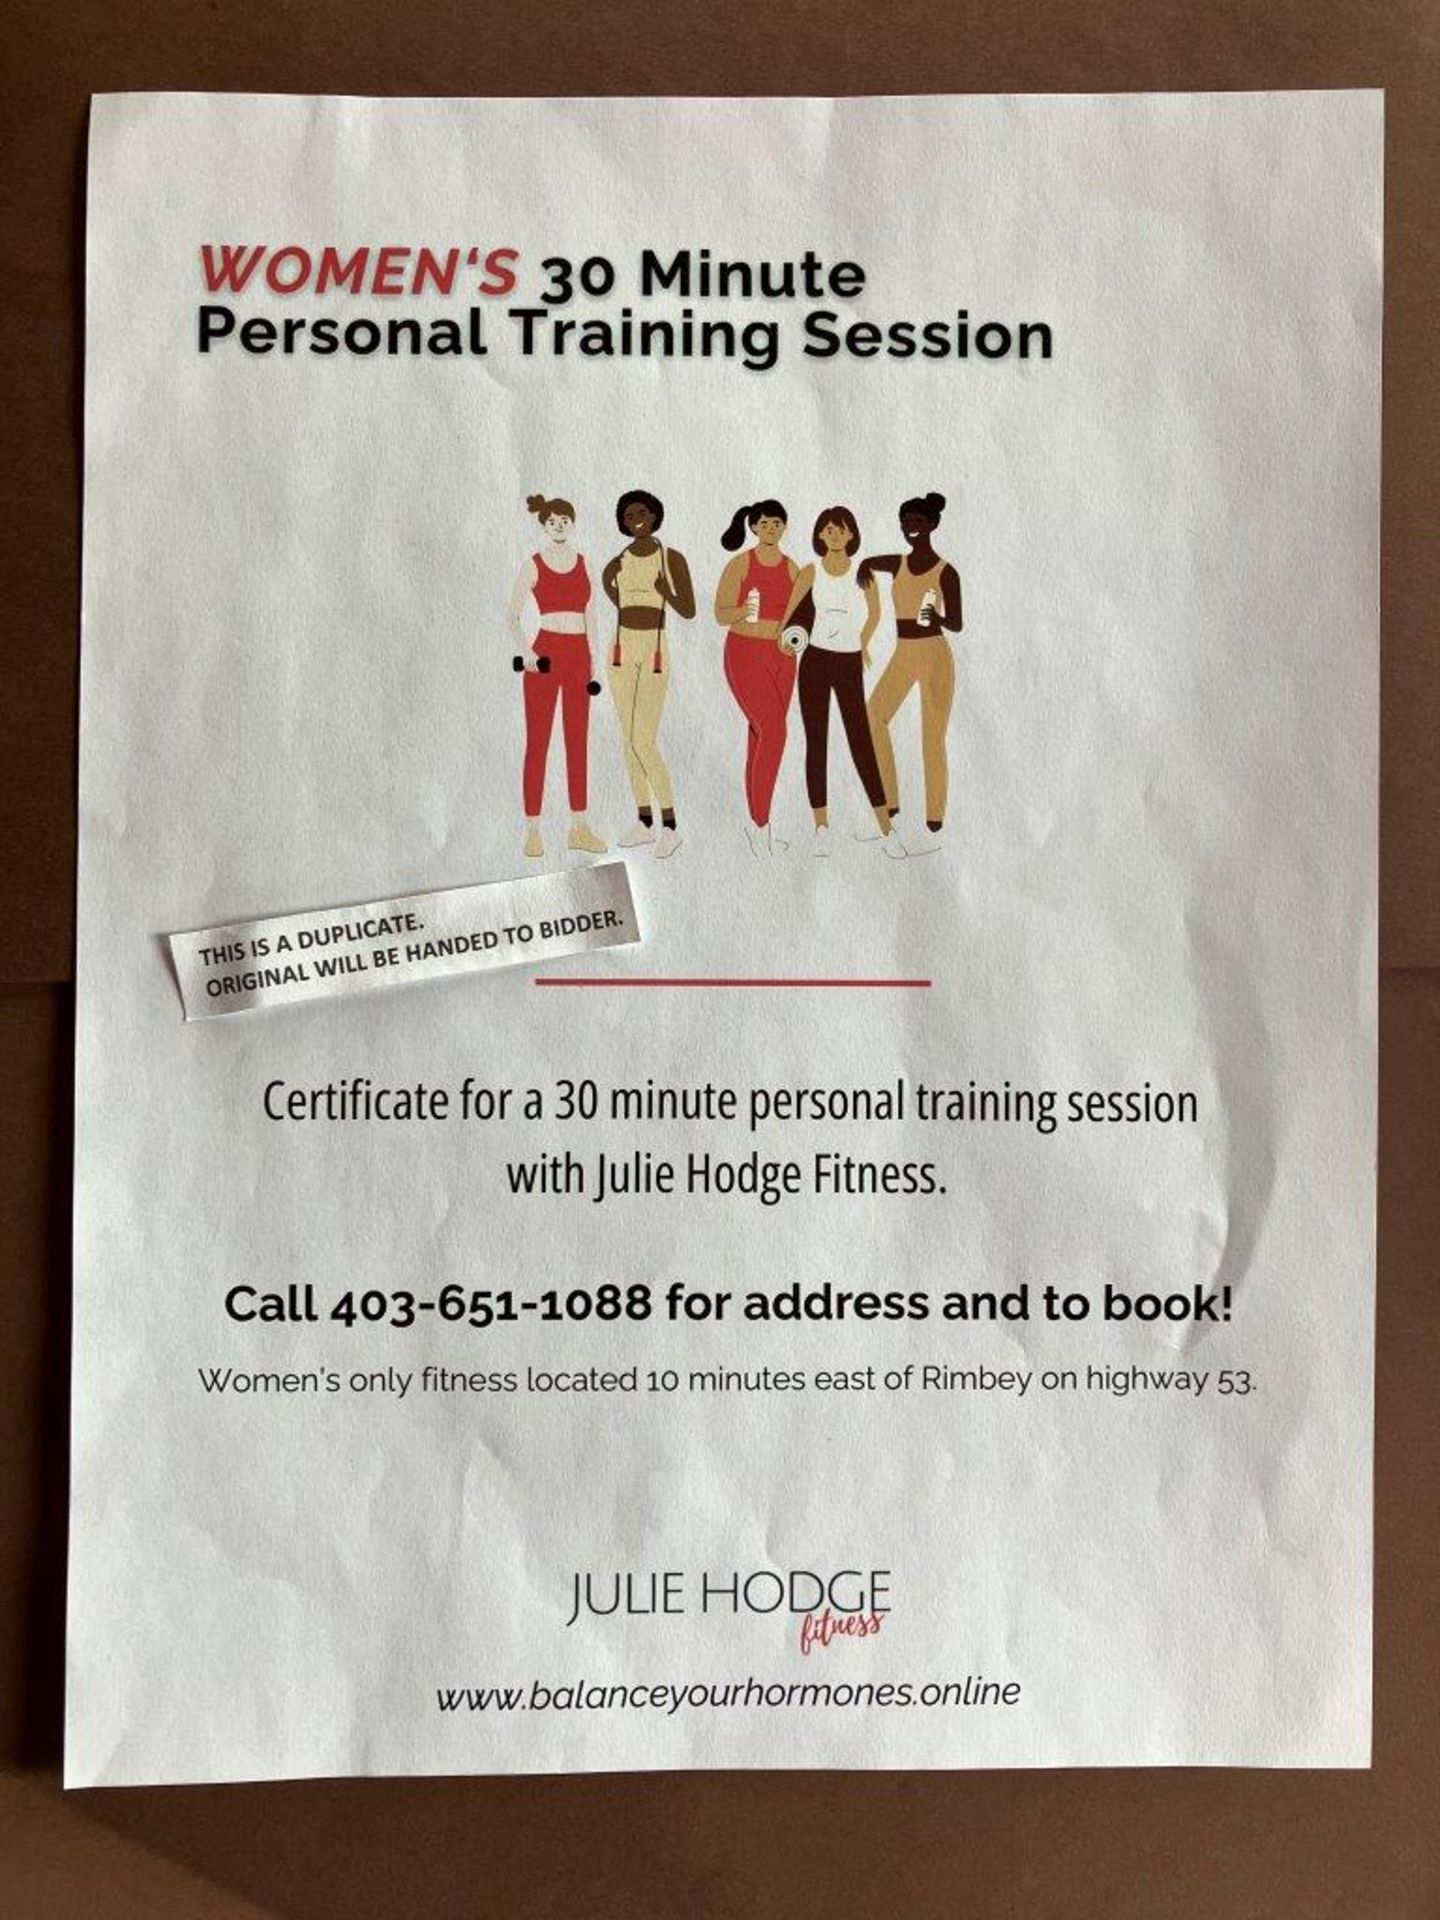 JULIE HODGE FITNESS WOMEN'S 30 MINUTE PERSONAL TRAINING GIFT CERTIFICATE